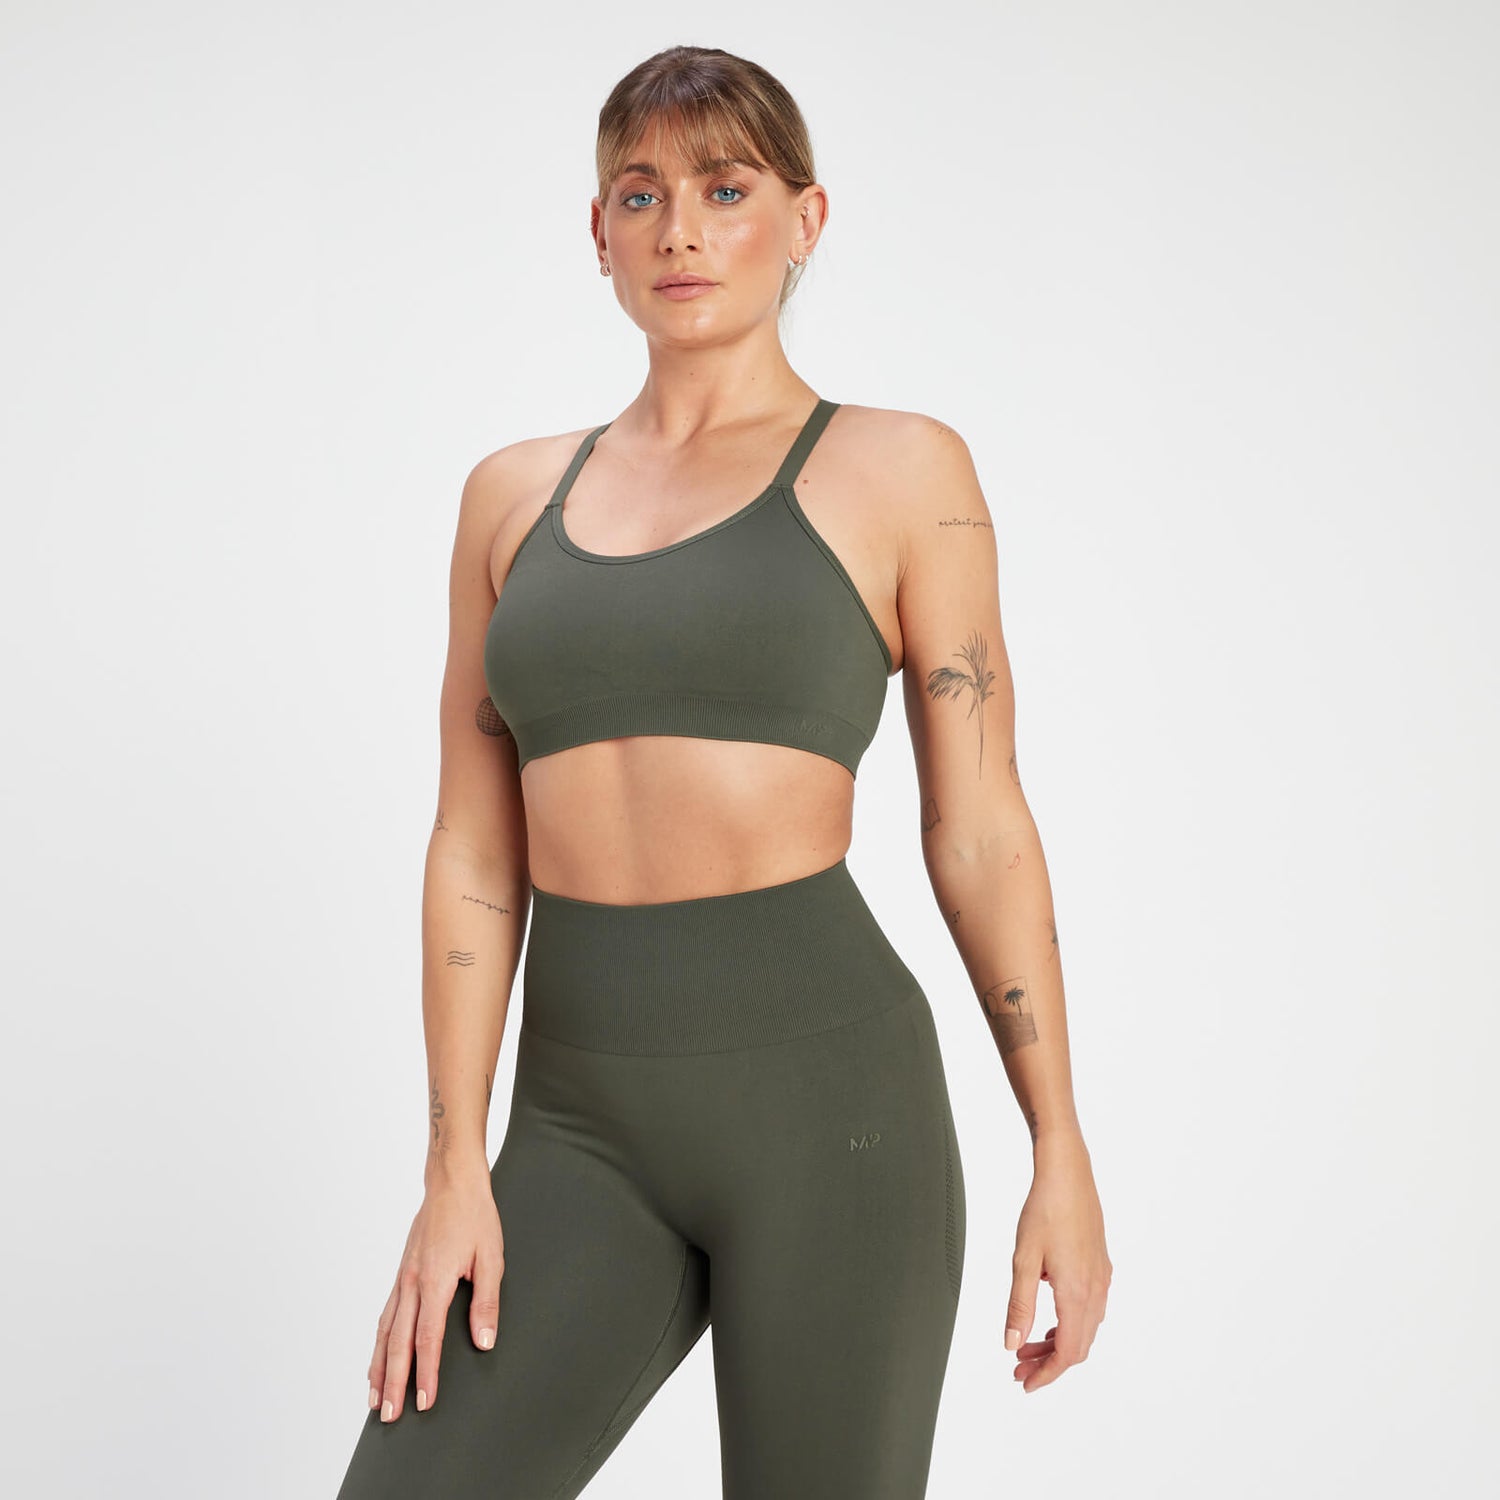 MP Women's Rest Day Seamless Cross Back Sports Bra - Taupe Green  - XS